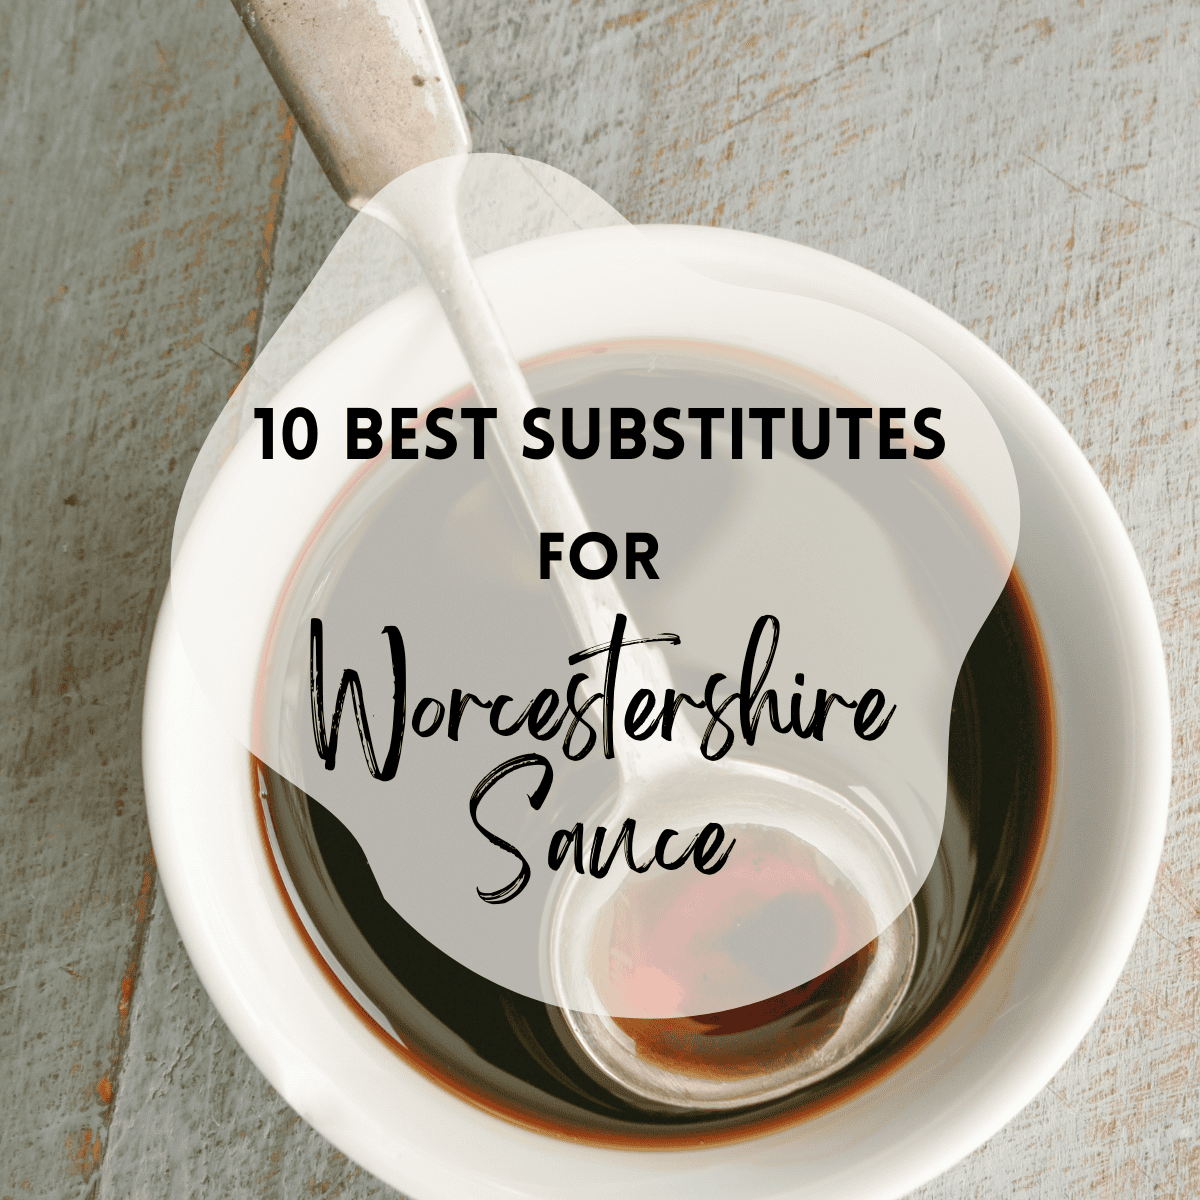 Image of Worcestershire sauce with text overlay that says '10 best substitutes for Worcestershire sauce'. 